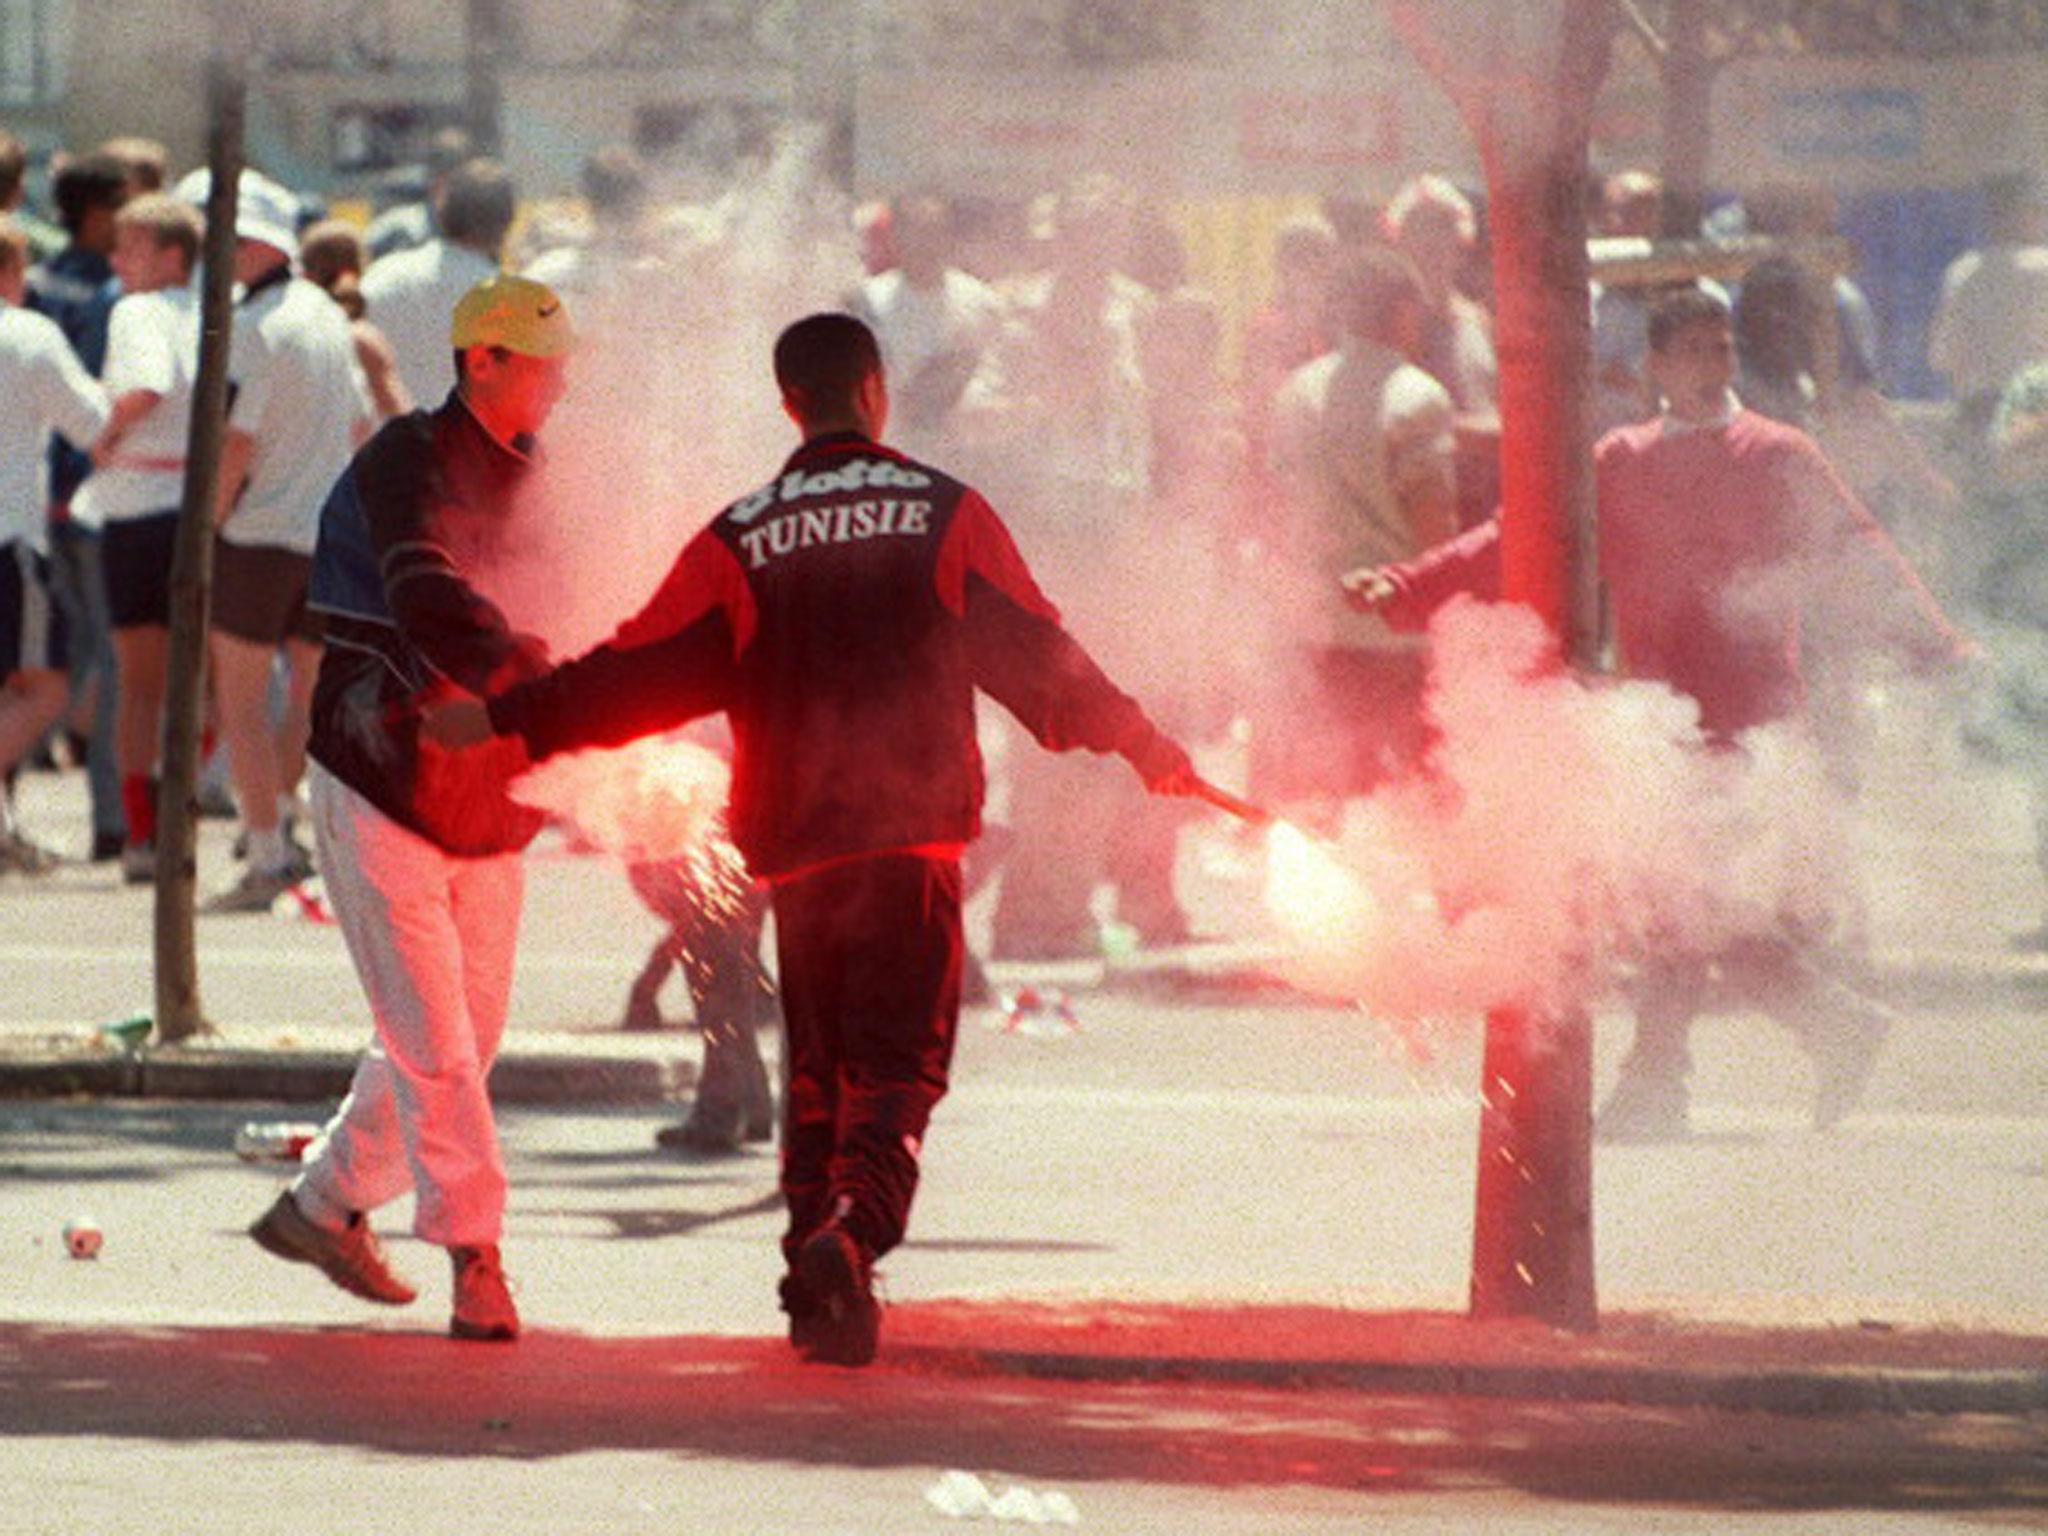 &#13;
Tunisia supporters hold flares during clashes with England fans in Marseilles at the 1998 World Cup finals (Getty)&#13;